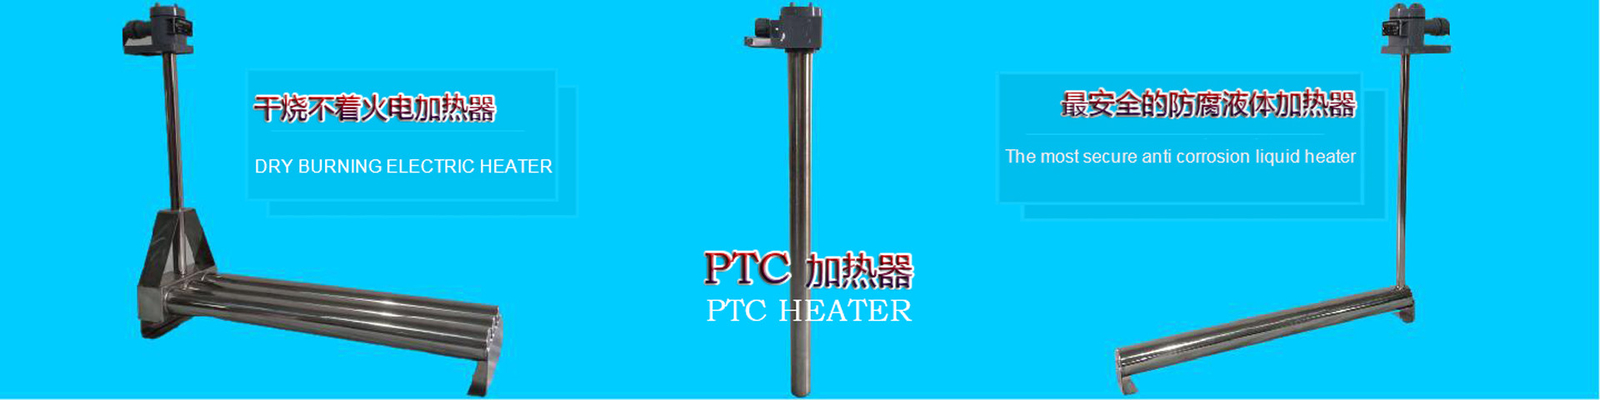 PTFE Immersion Heater